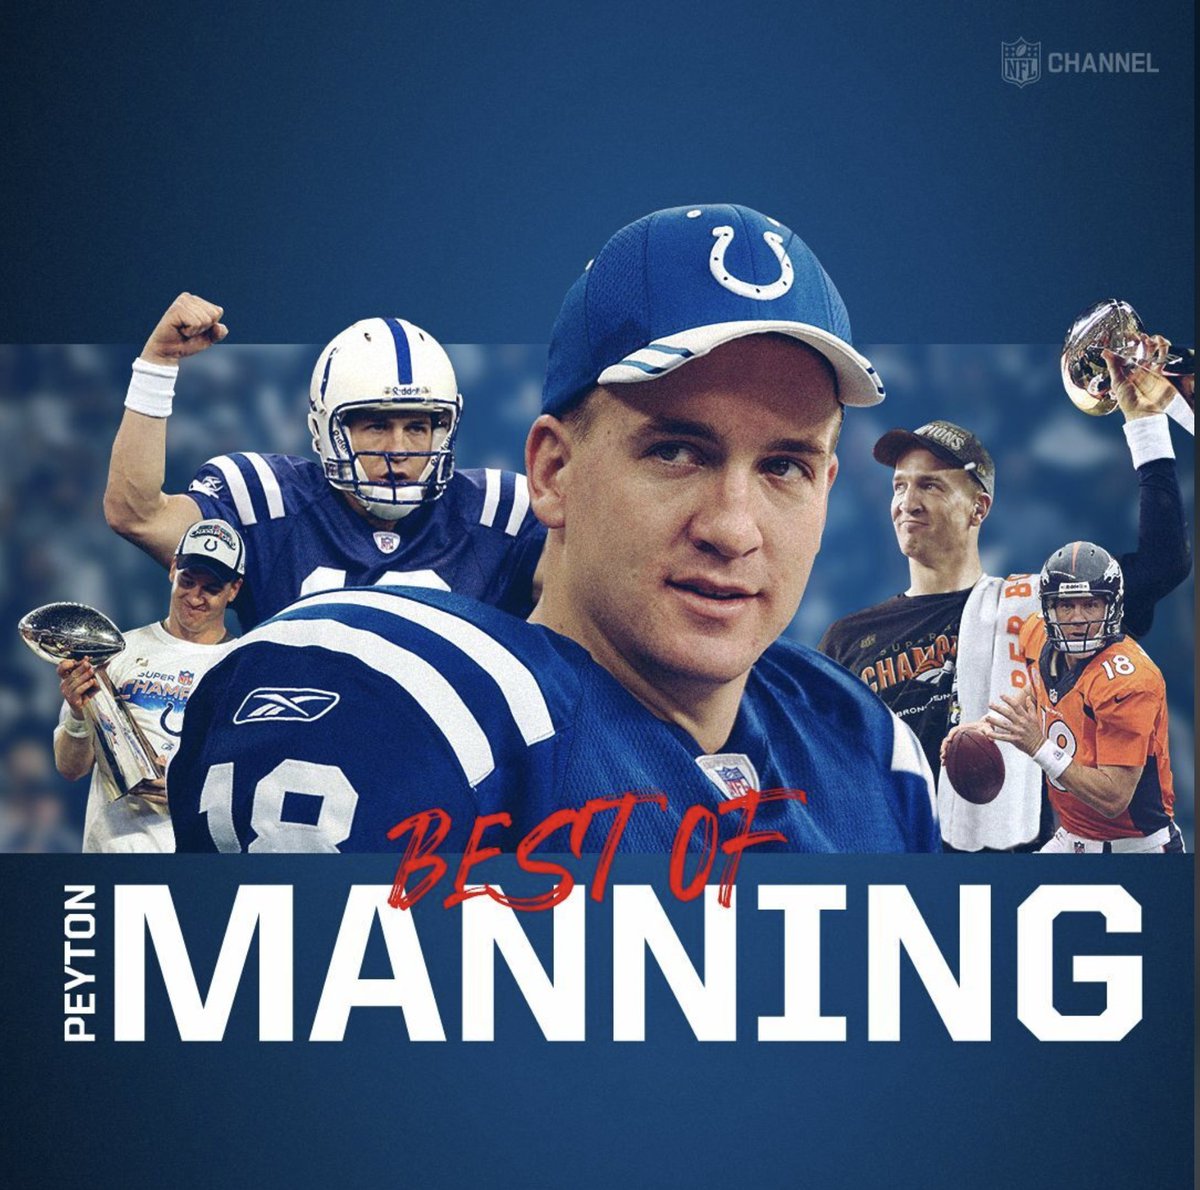 2x champ. 5x NFL MVP. 14x Pro Bowler. Relive some of Peyton Manning's greatest career moments on the #NFLChannel: bit.ly/3qXy0n6